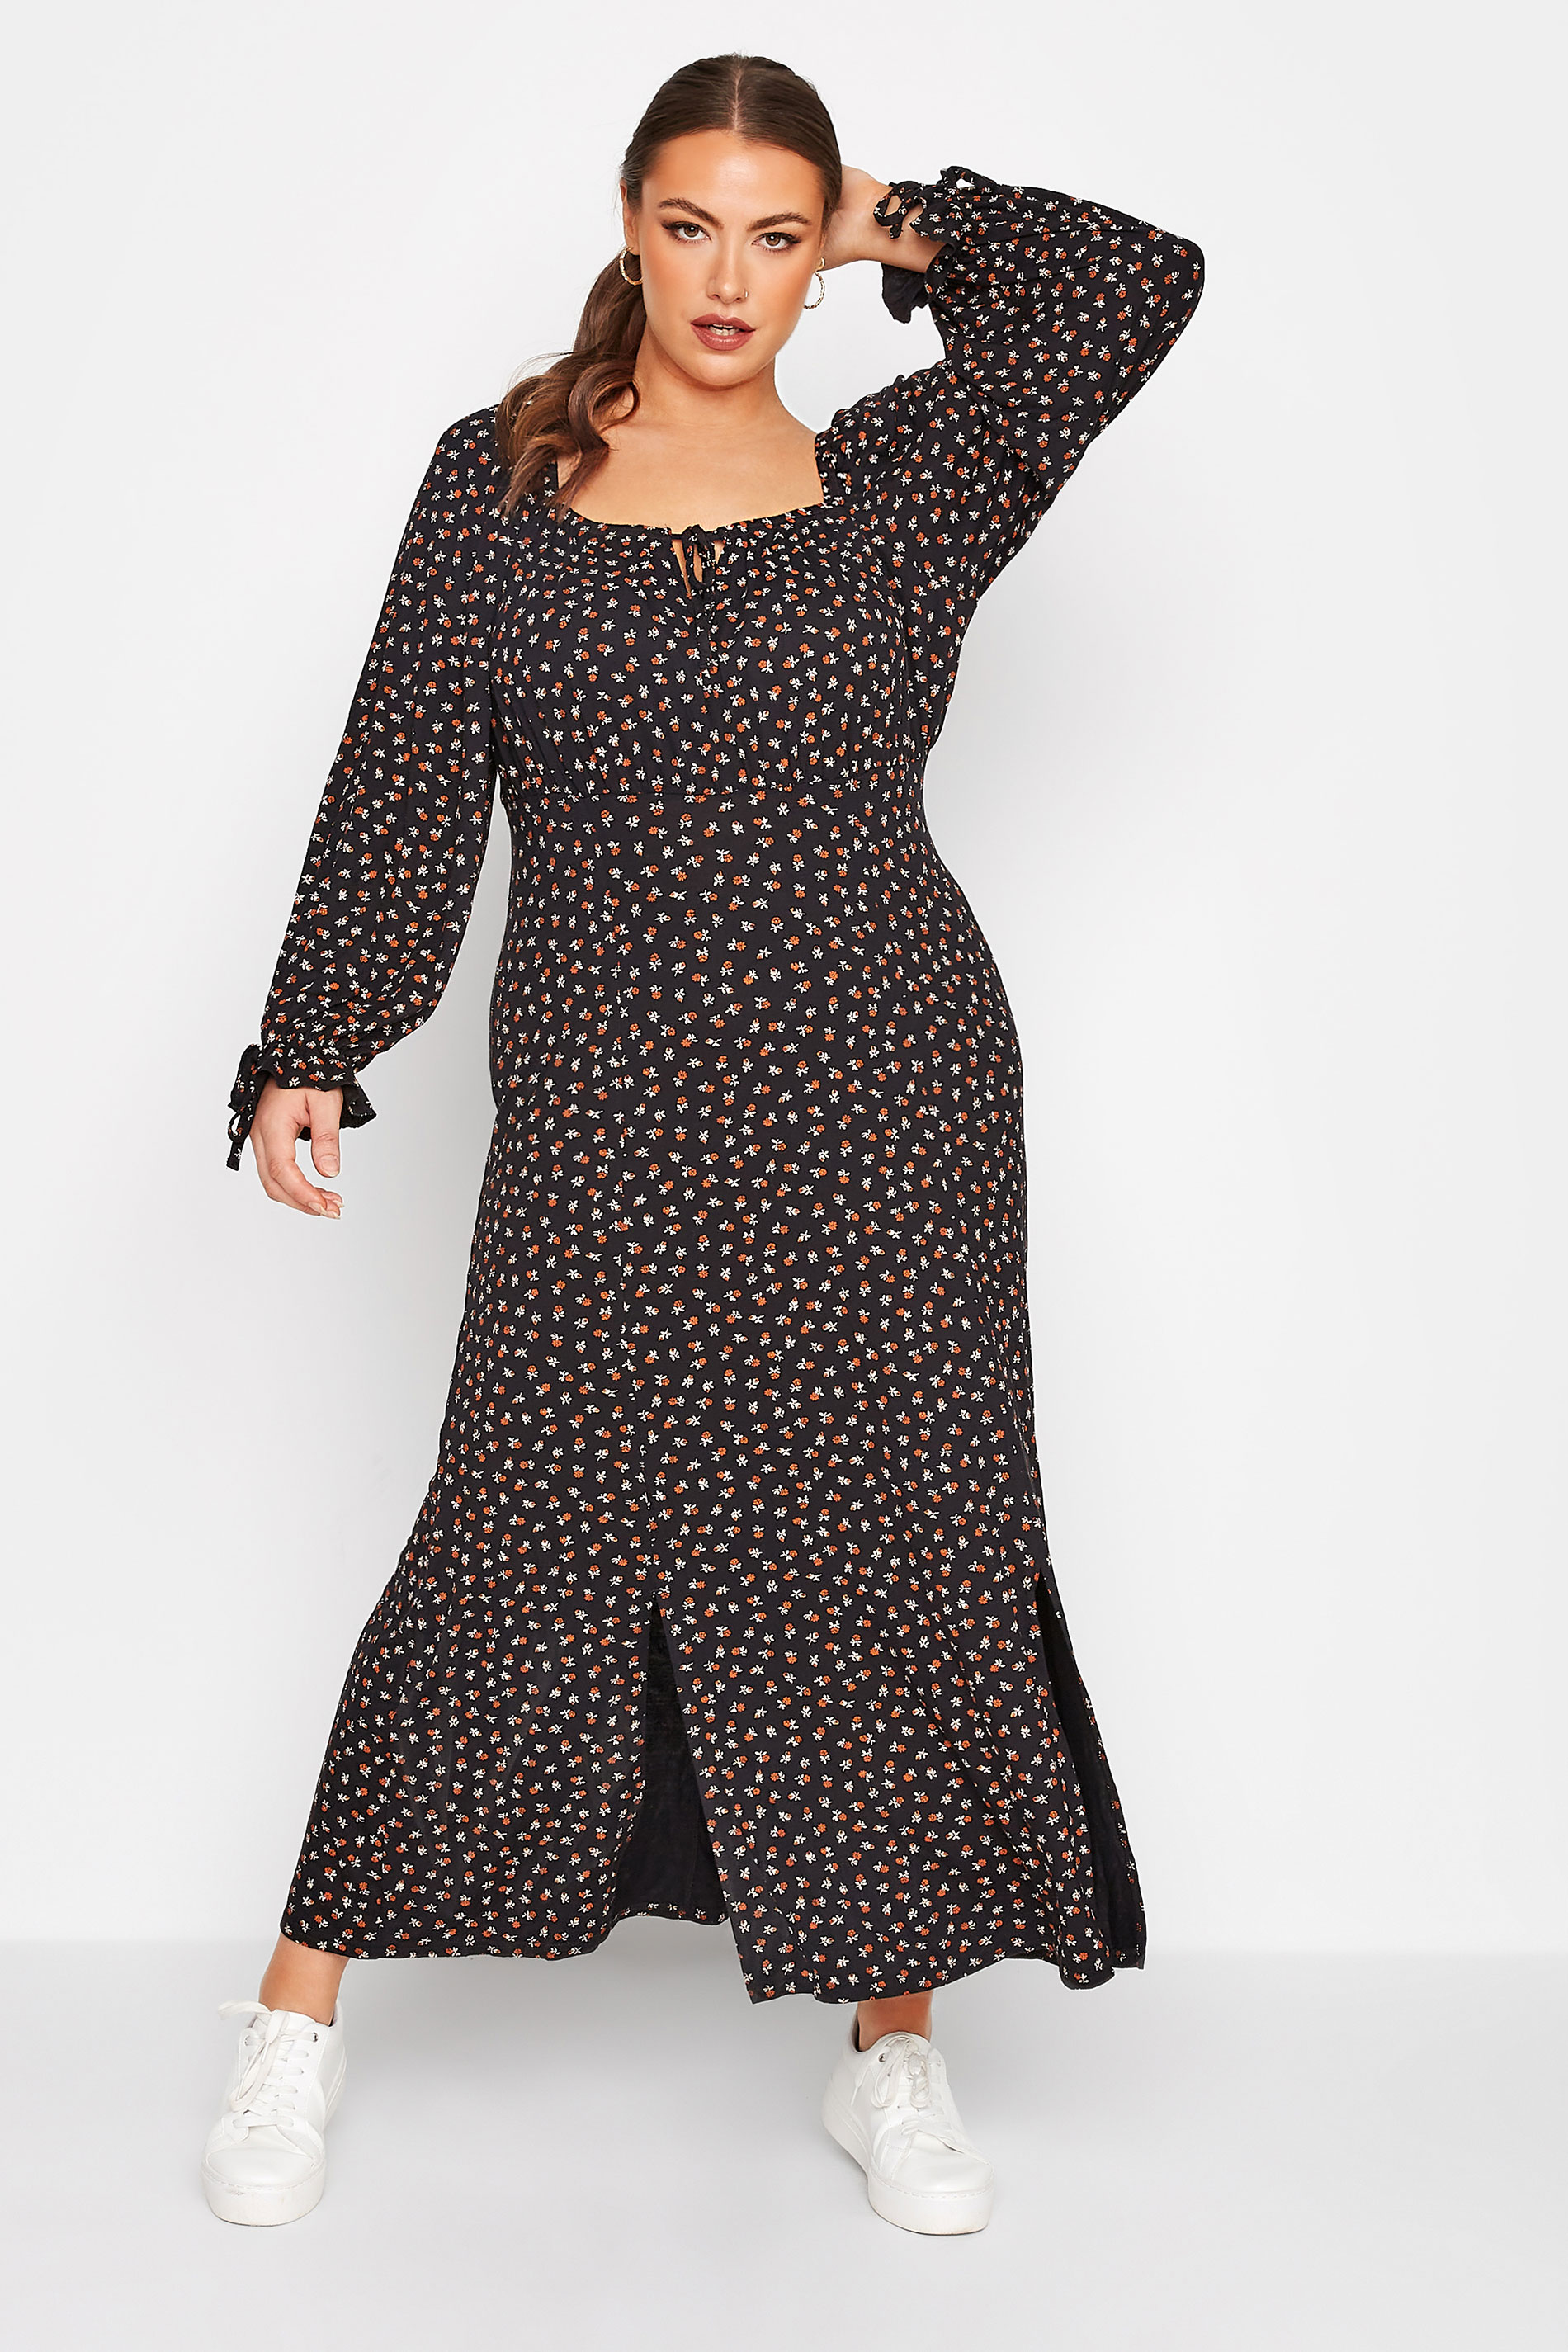 LIMITED COLLECTION Plus Size Black Ditsy Print Milkmaid Maxi Dress | Yours Clothing 1